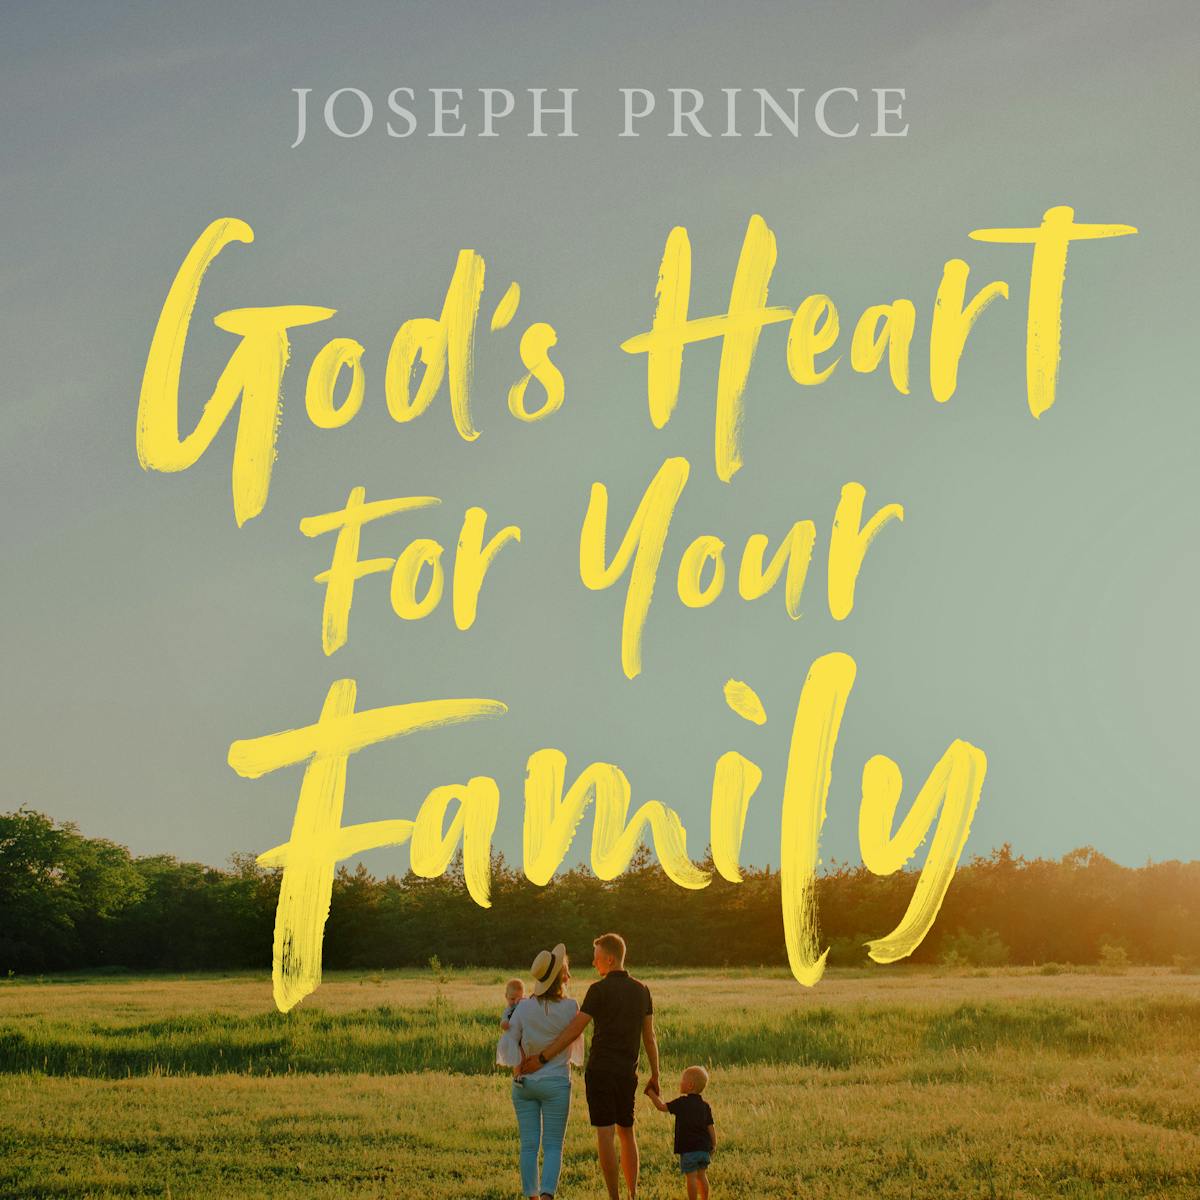 quotes about god and family